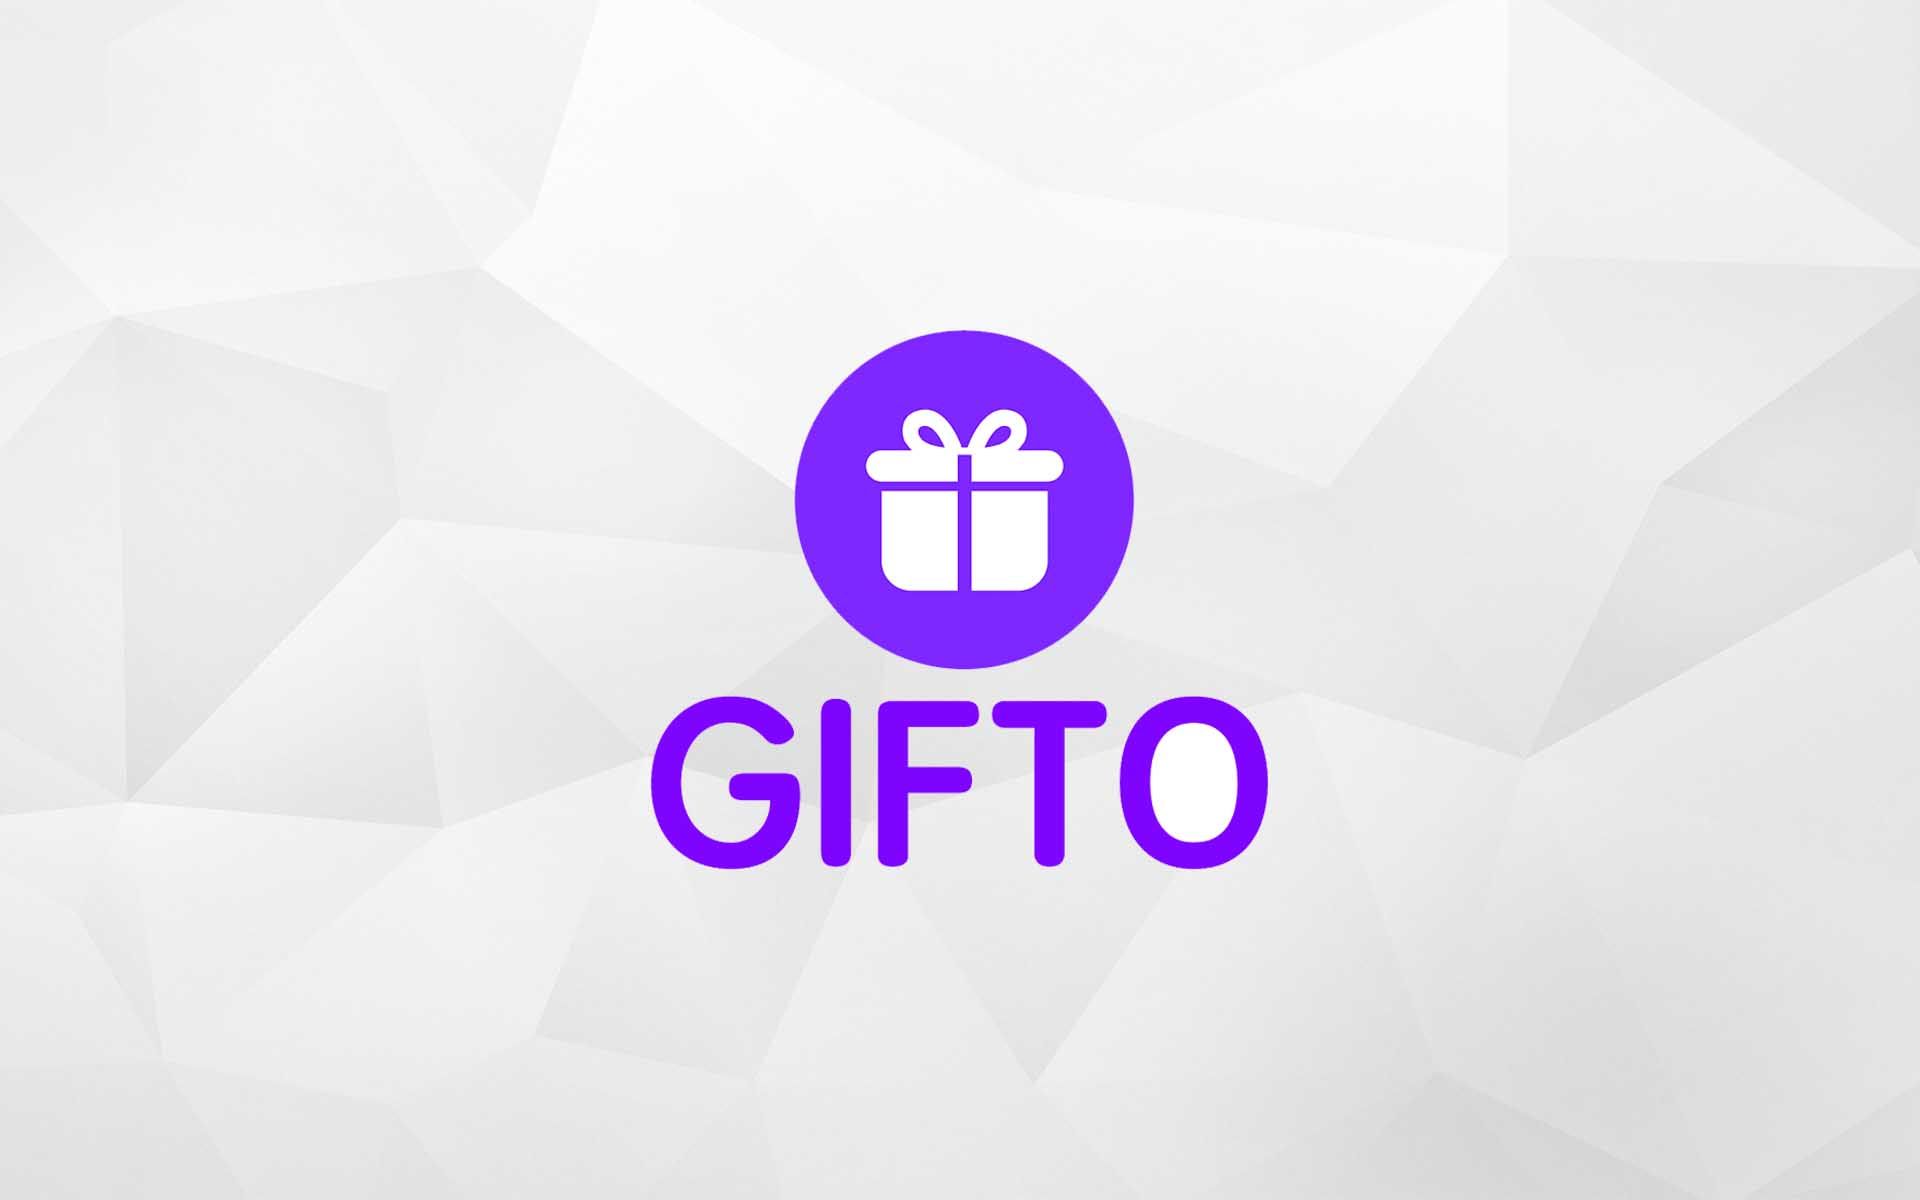 Gifto (GTO) vs Verge (XVG) - What Is The Best Investment?